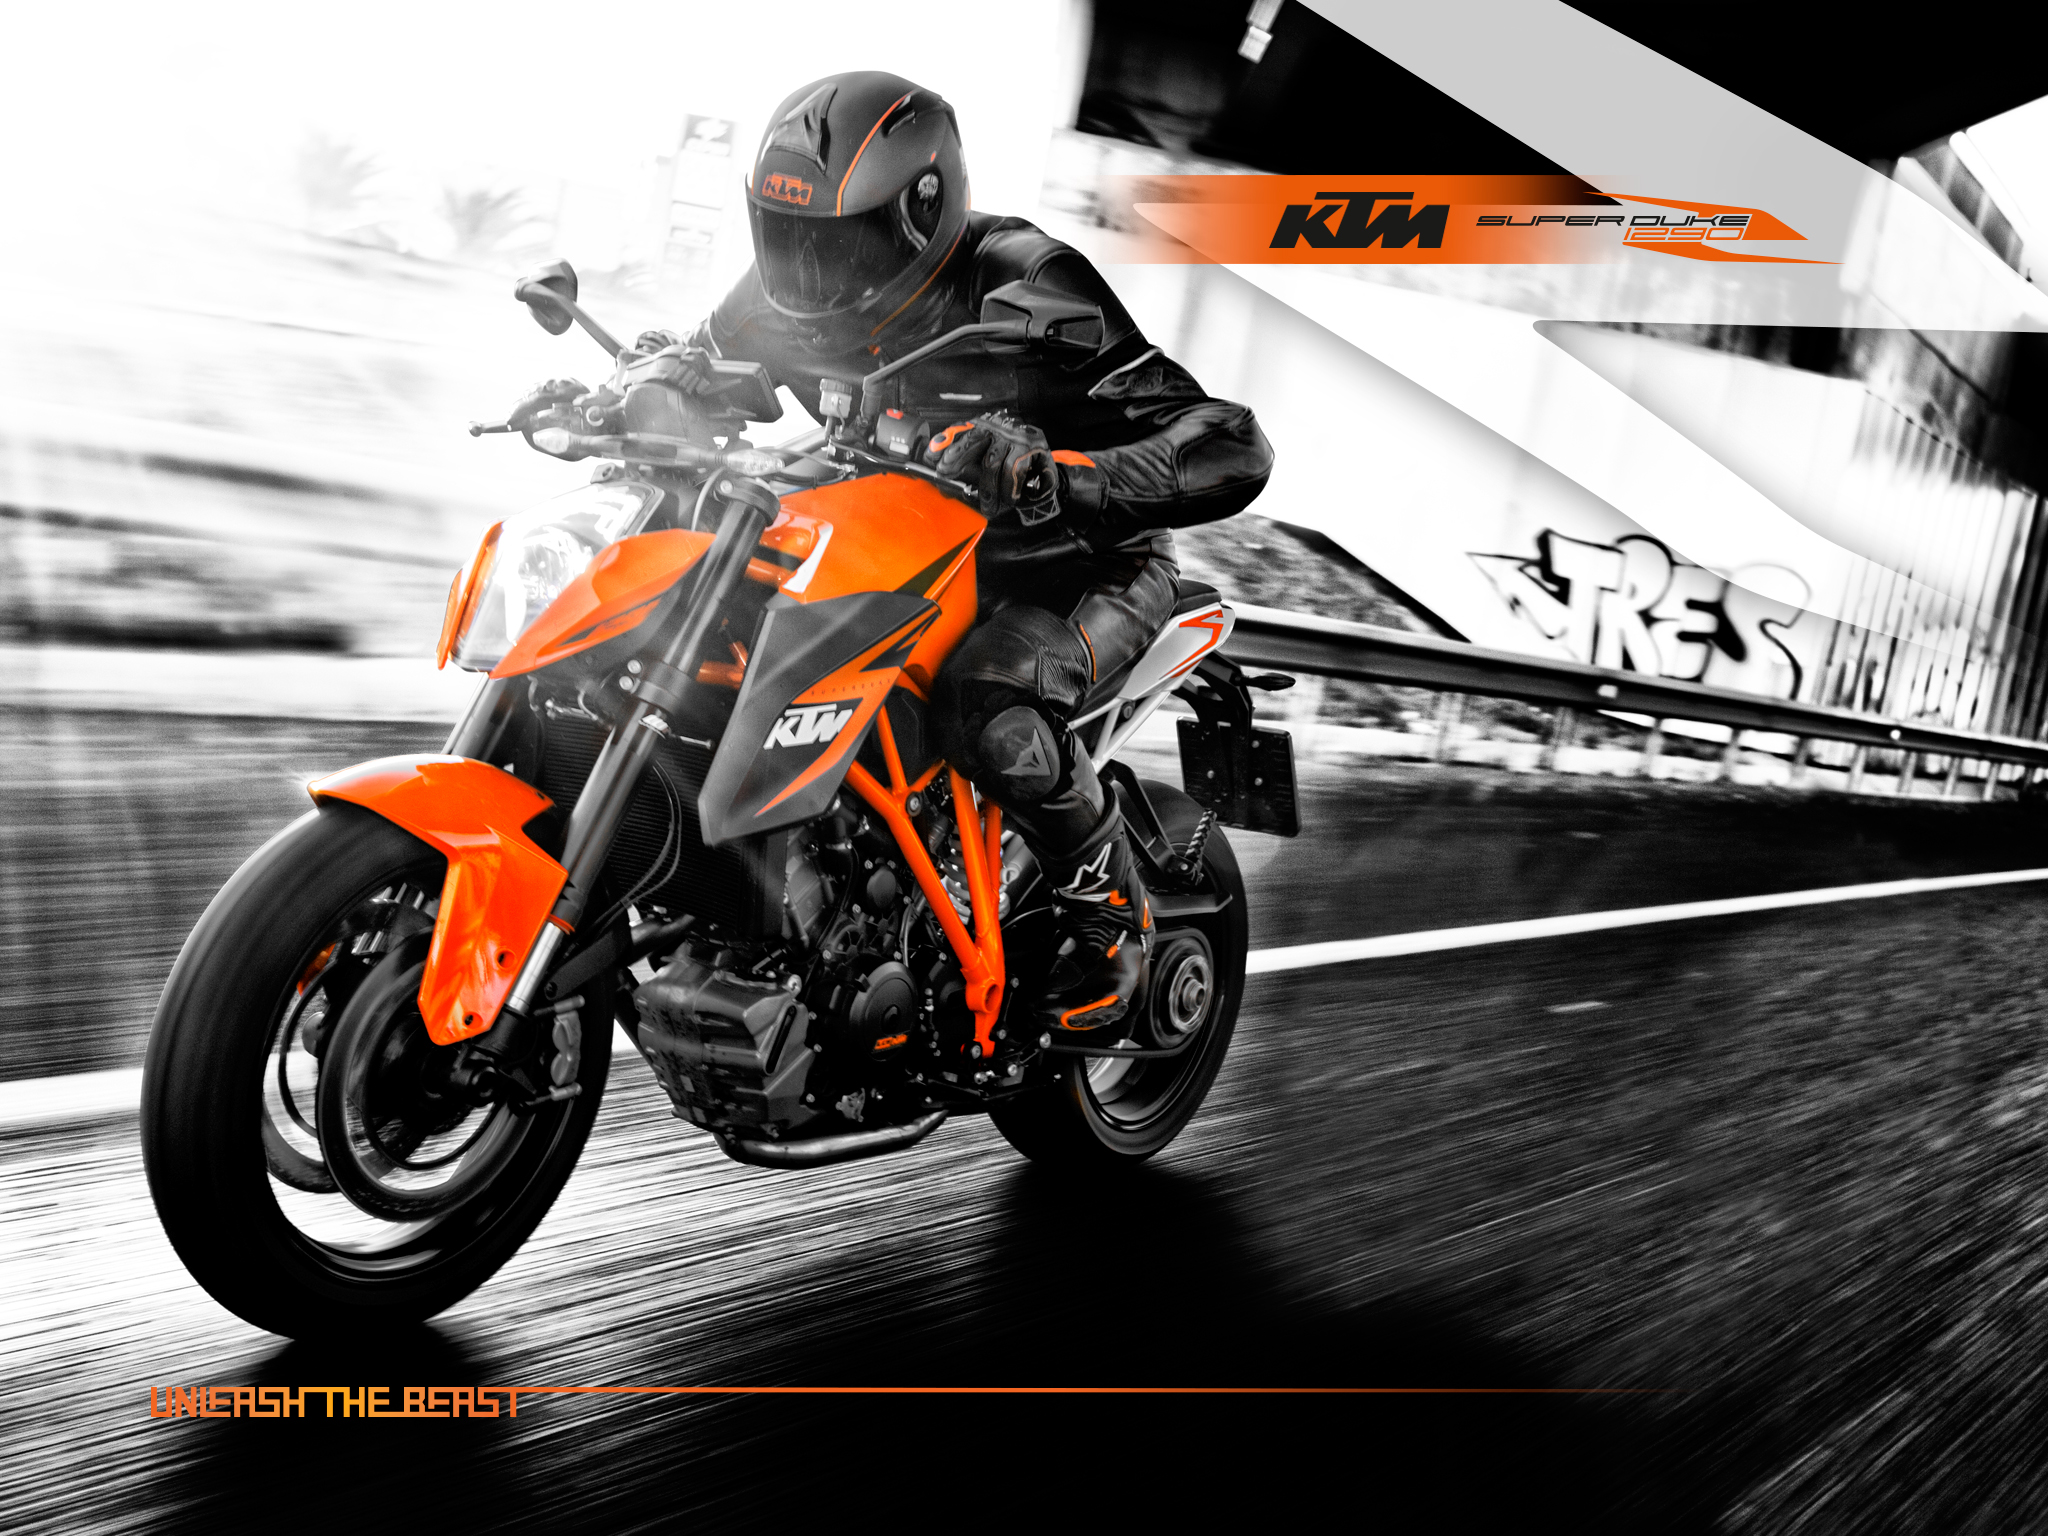 ktm-1290-super-duke-r-official-pics-and-specs-surface-photo-gallery 1